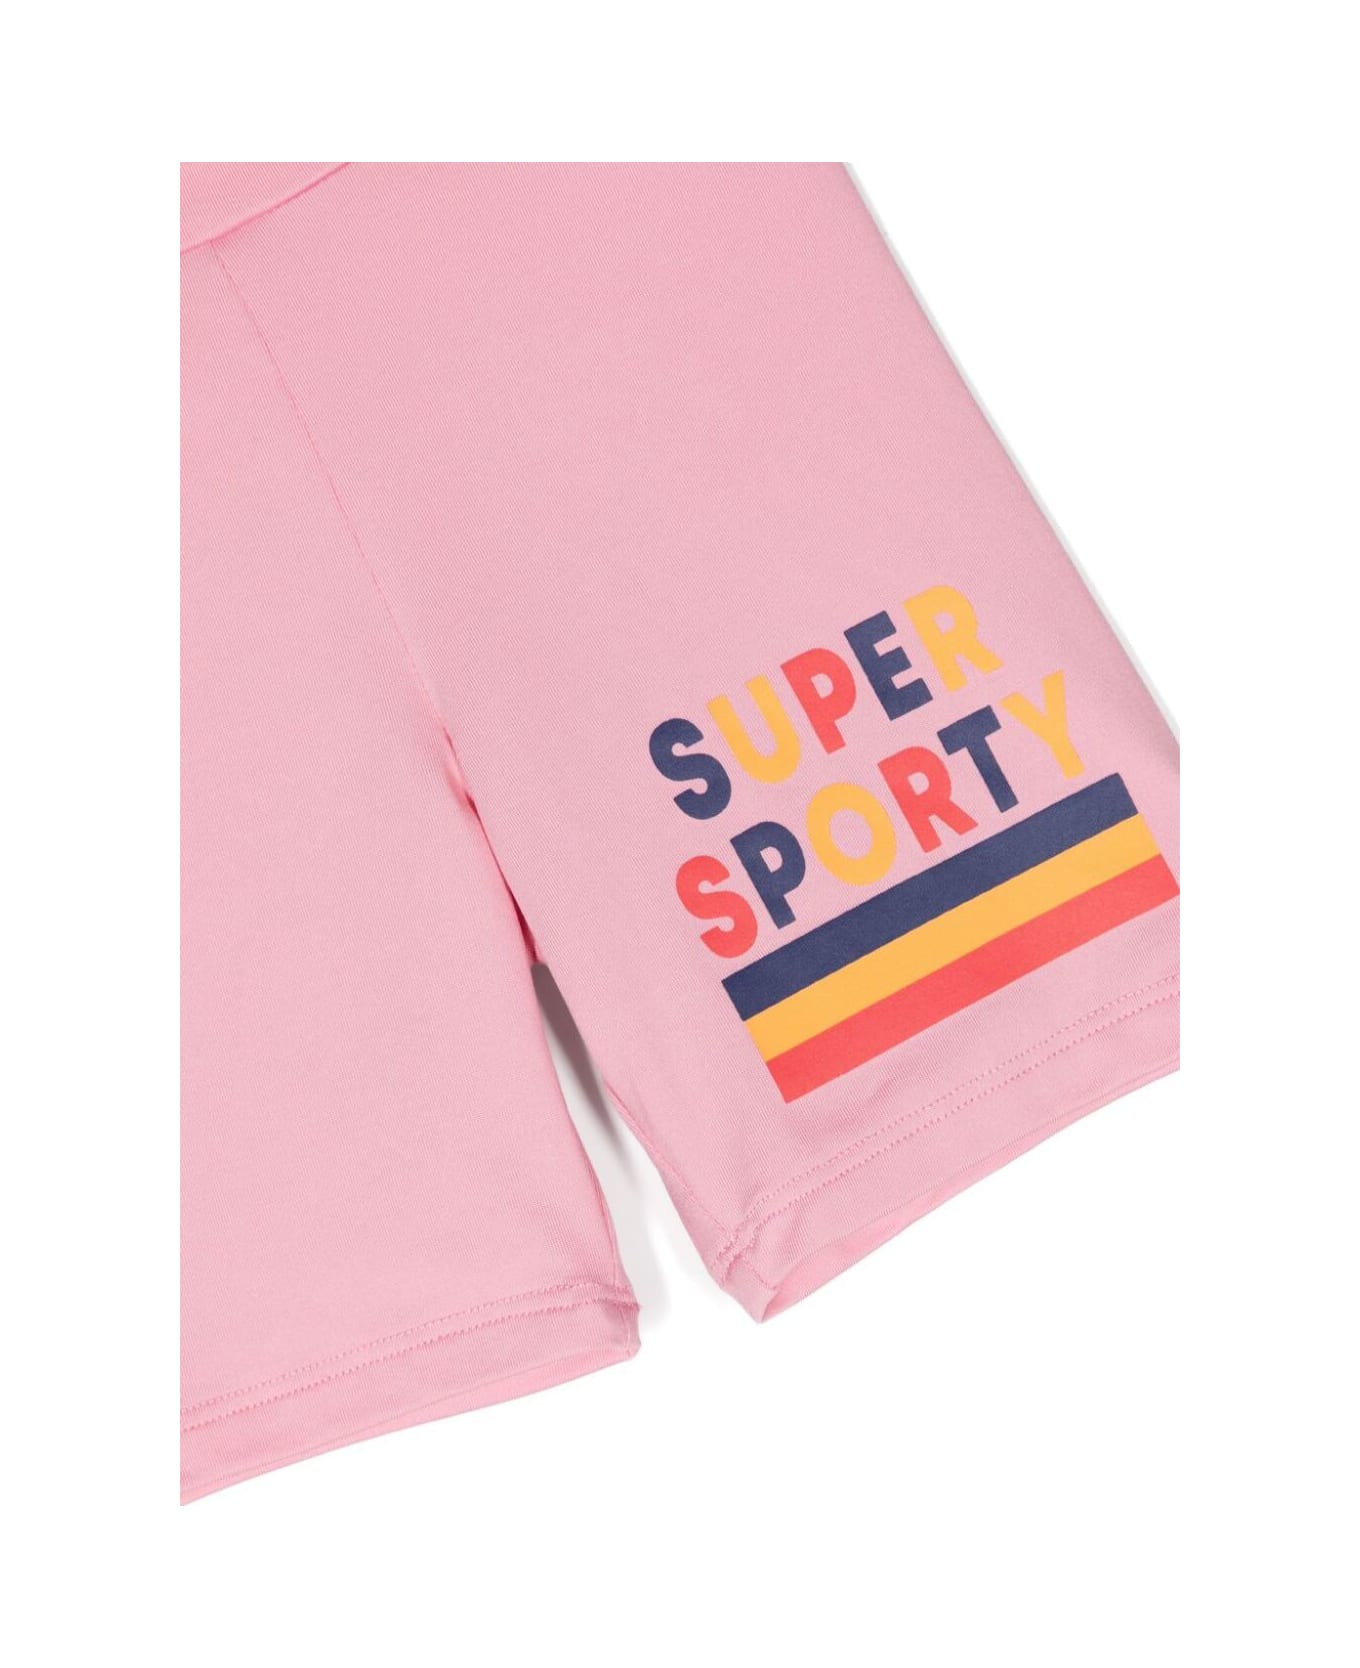 Mini Rodini Pink Biker Shorts With Super Sporty Print In Stretch Fabric Girl - Pink ボトムス